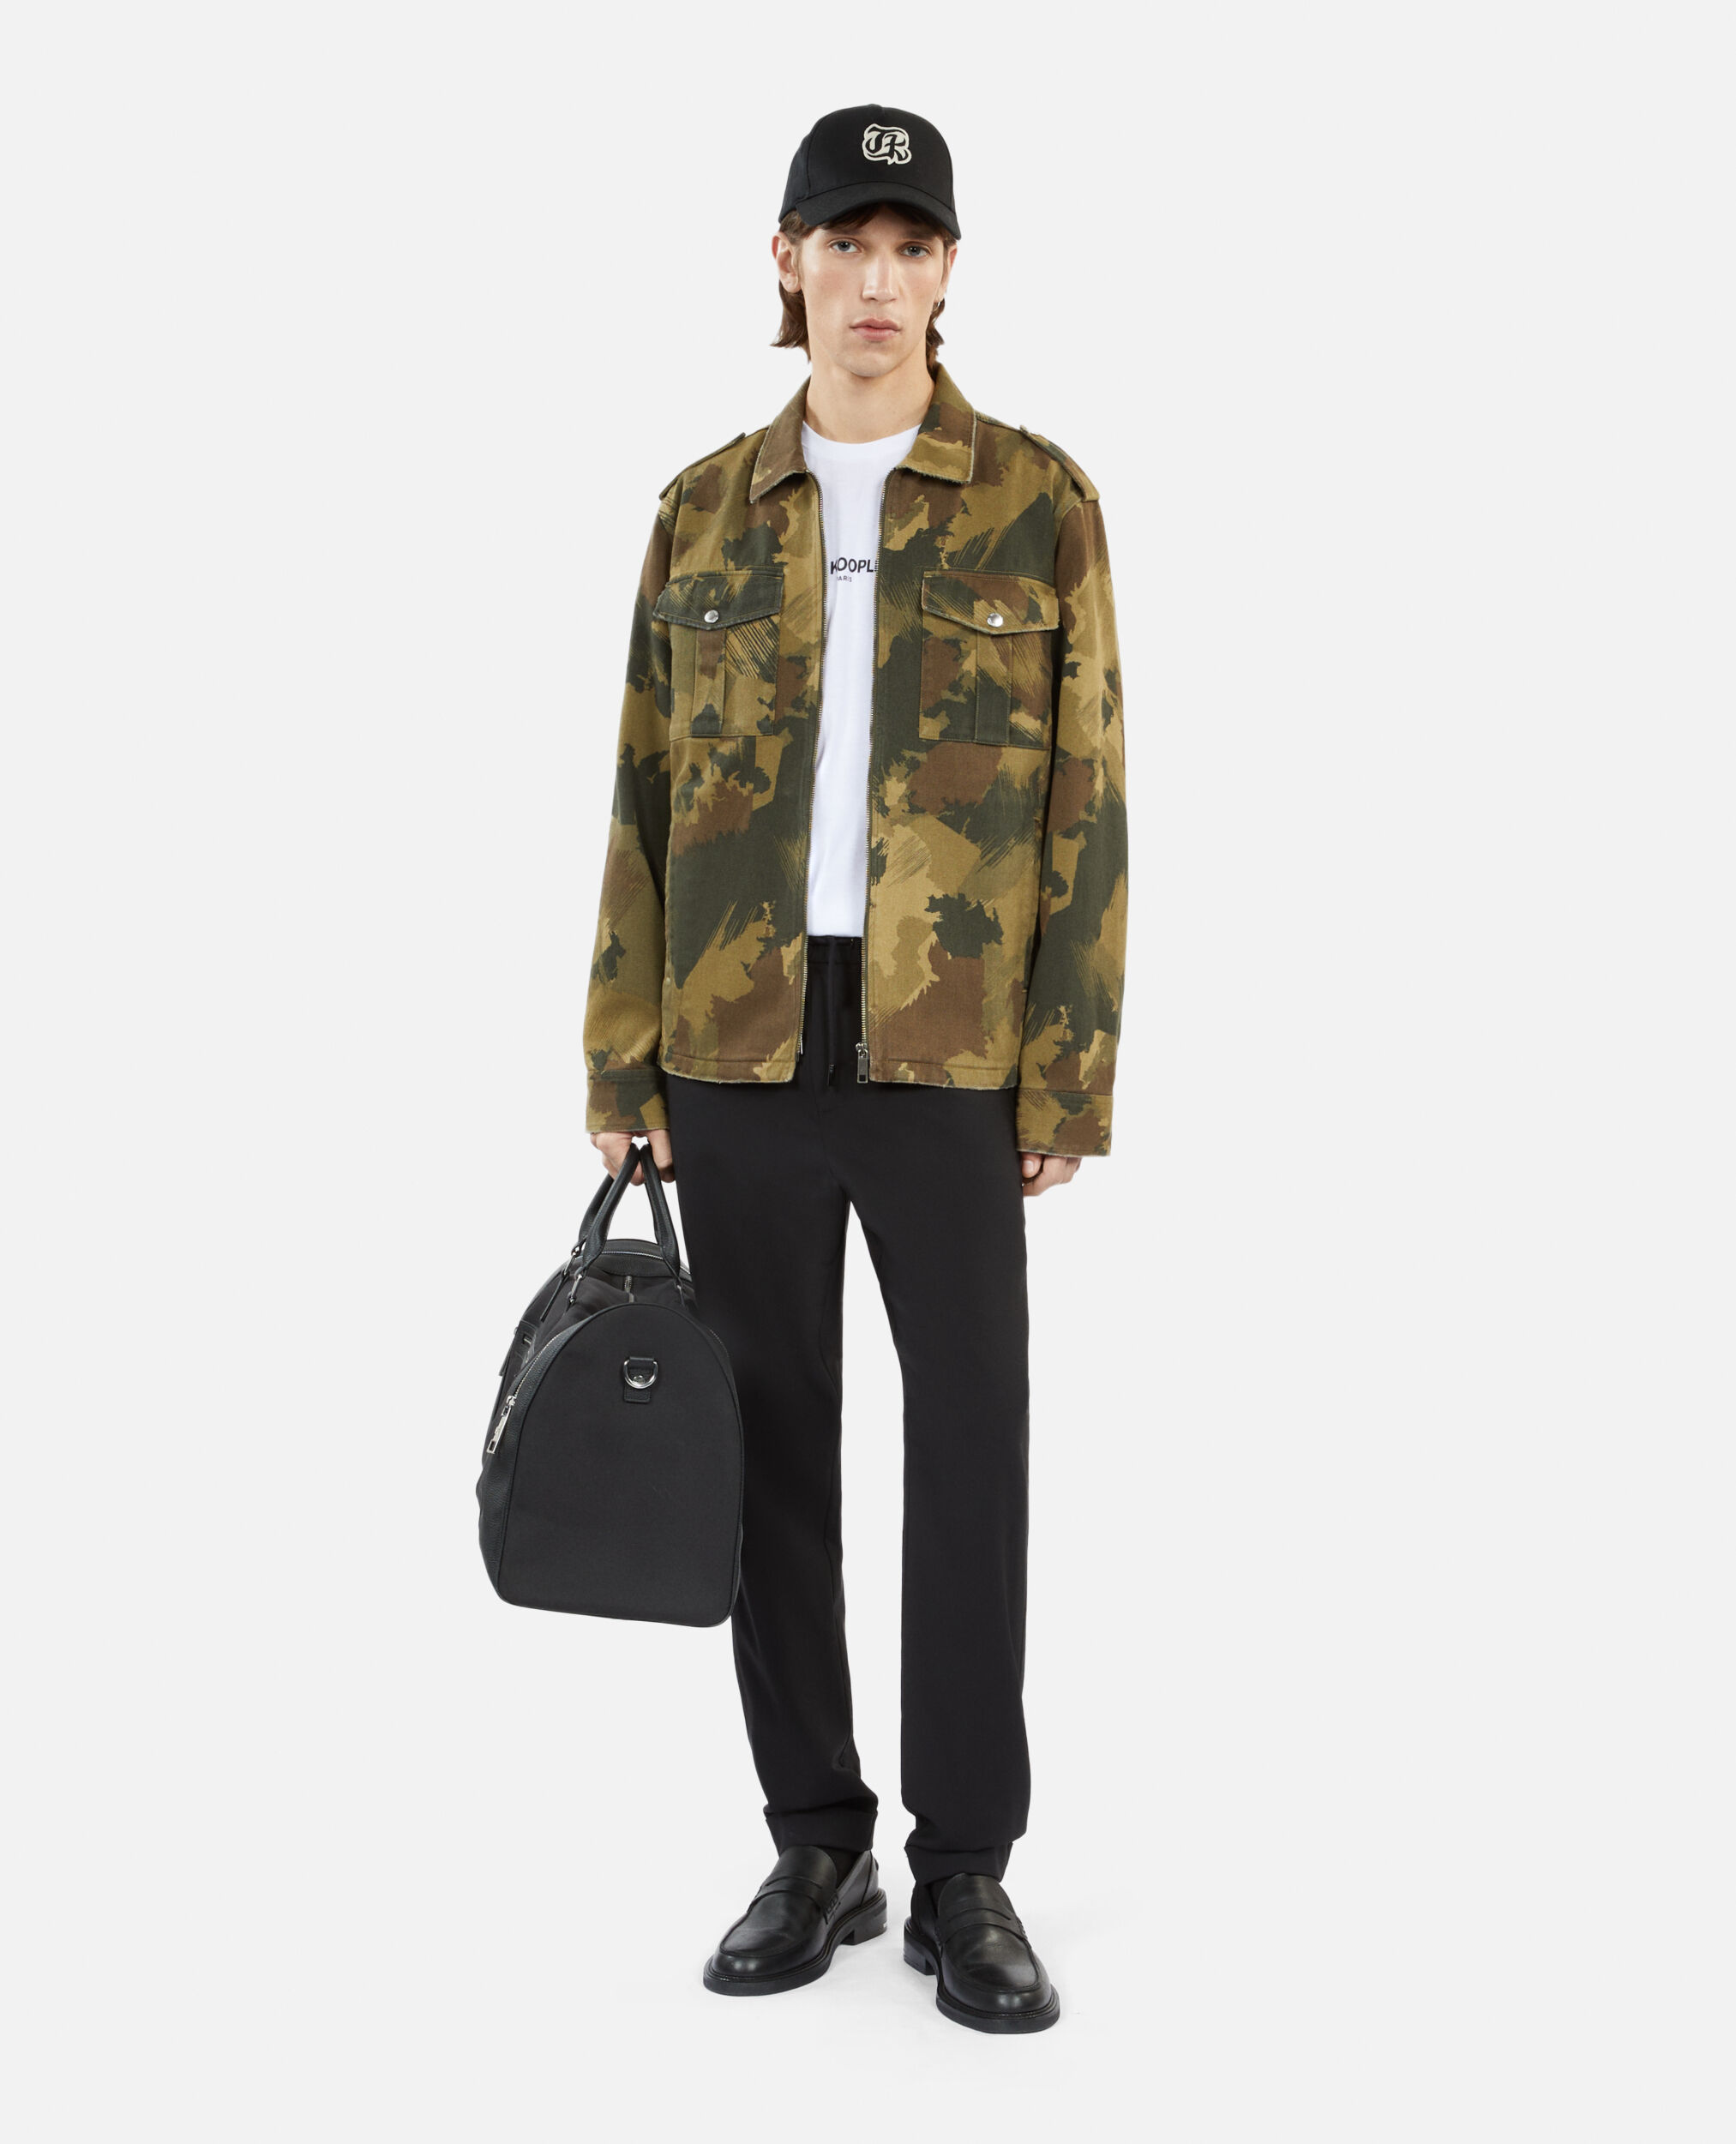 Blouson camouflage, CAMOUFLAGE, hi-res image number null